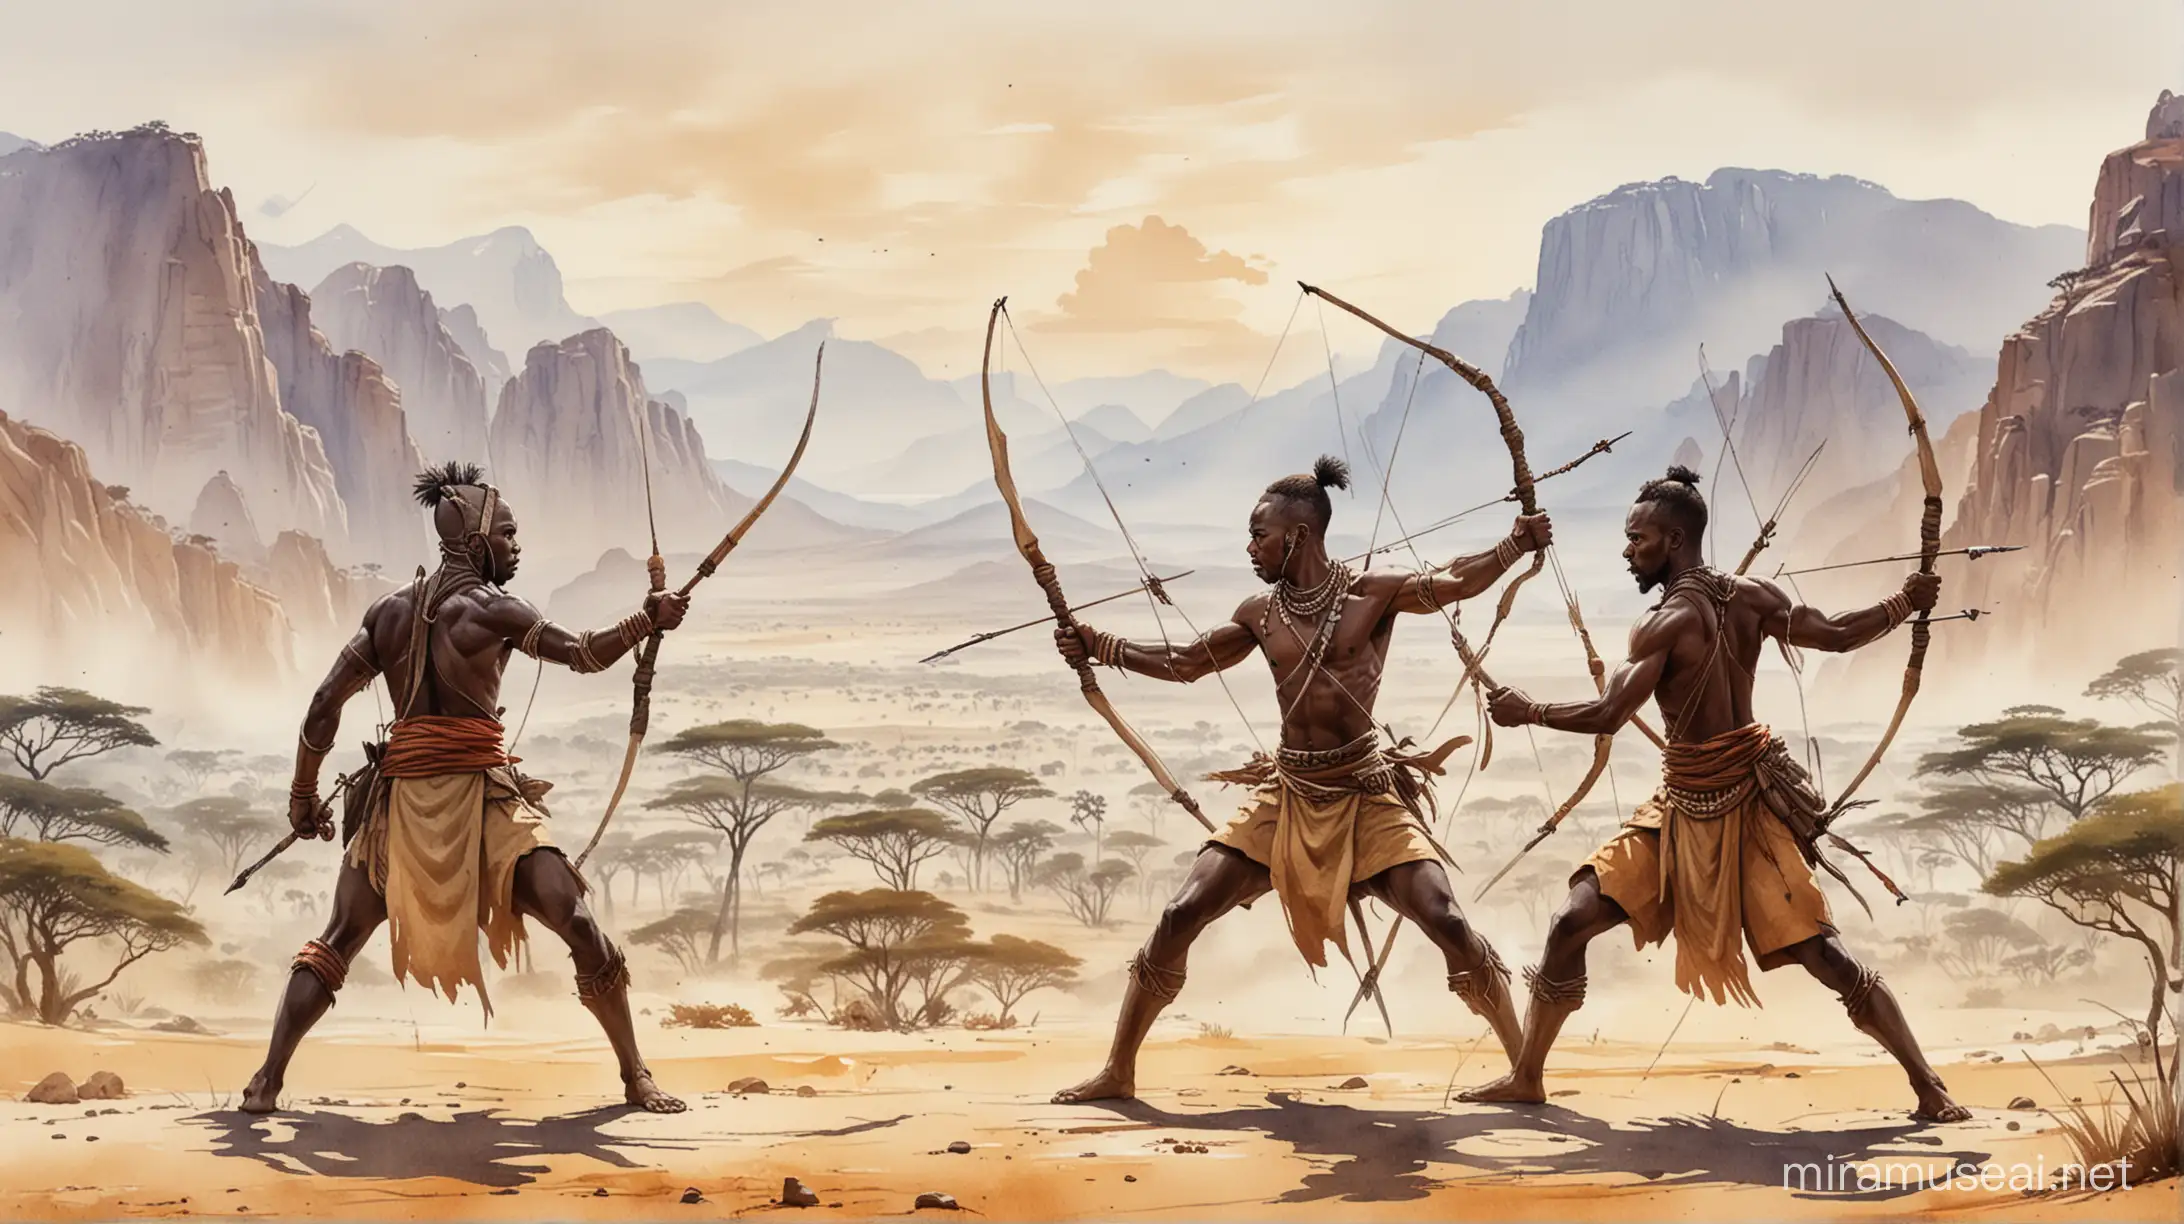 Two African Savana warriors fighting each other, and background mountains. They are very skinny, and they use spears and bows. The whole setting is artistic, minimalistic and drawn in watercolors.